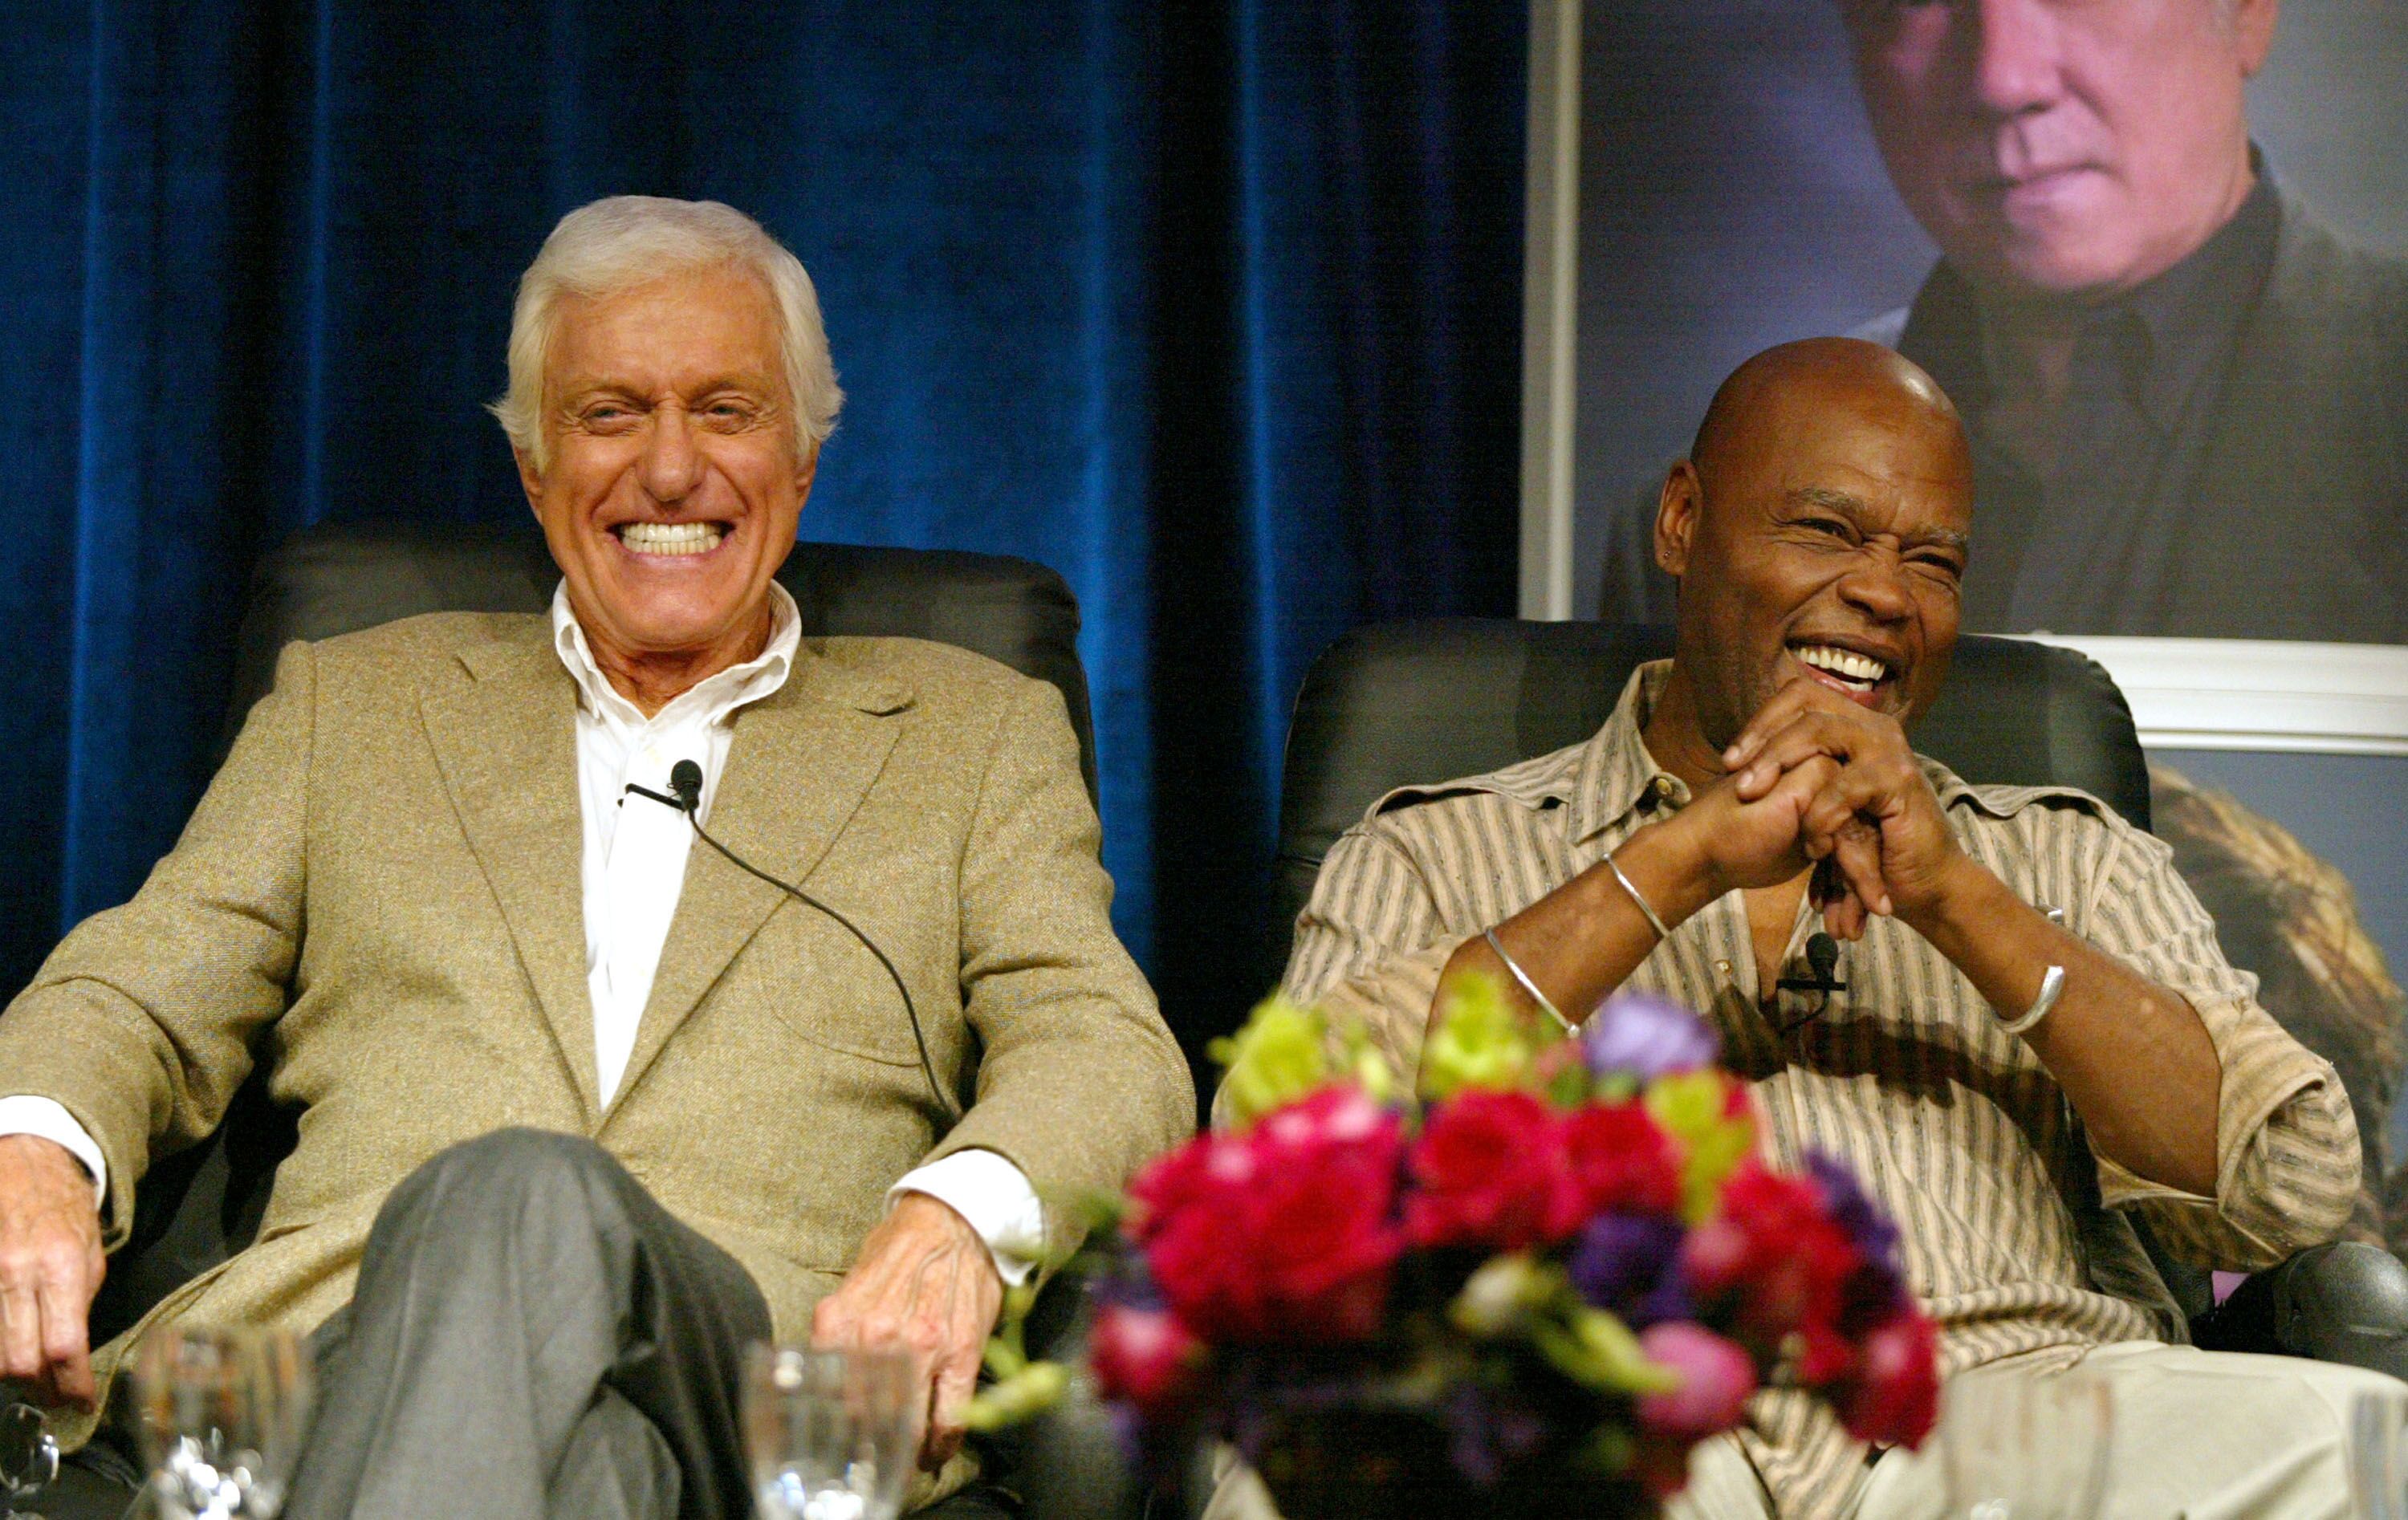 Dick Van Dyke and George Stanford Brown attend the Hallmark Channel presentation. | Source: Getty Images